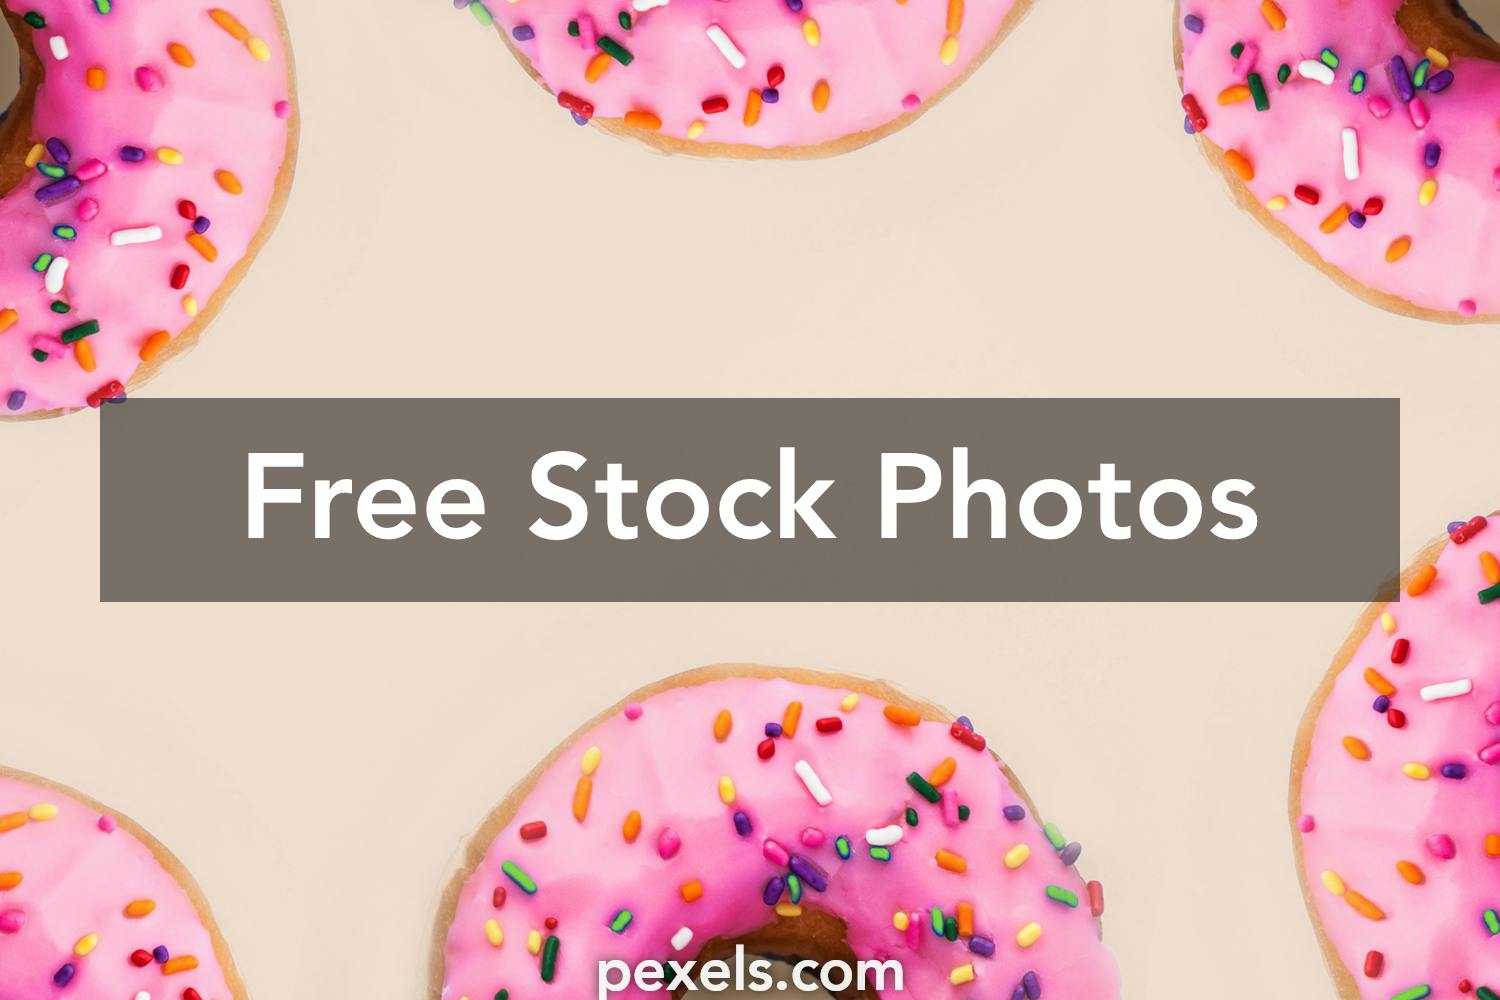 Donut Photos, Download The BEST Free Donut Stock Photos & HD Images